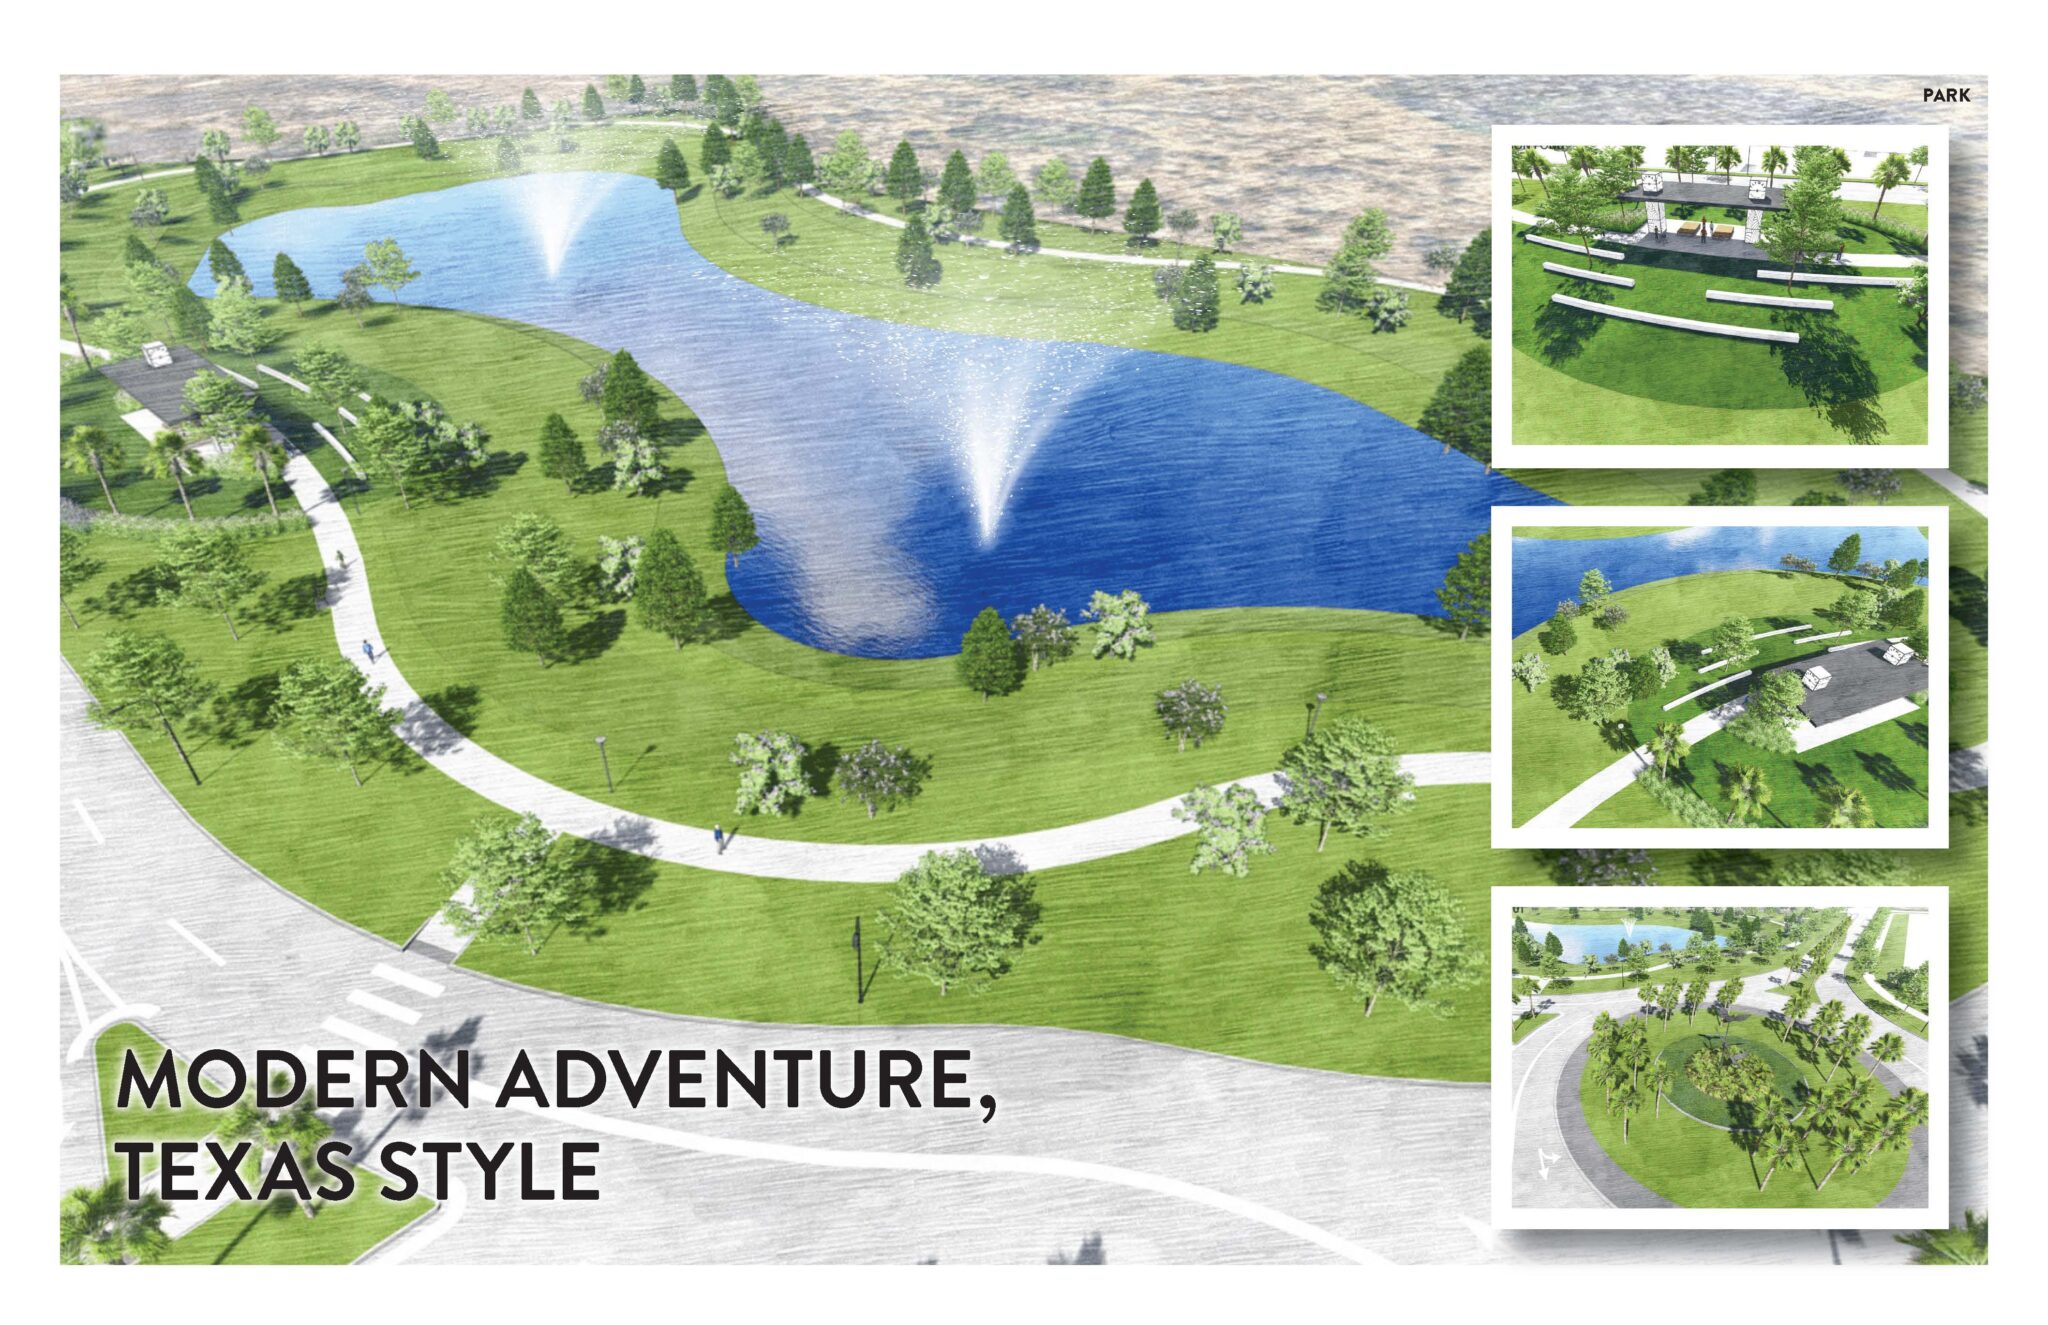 Conceptual Rendering - Park during the day